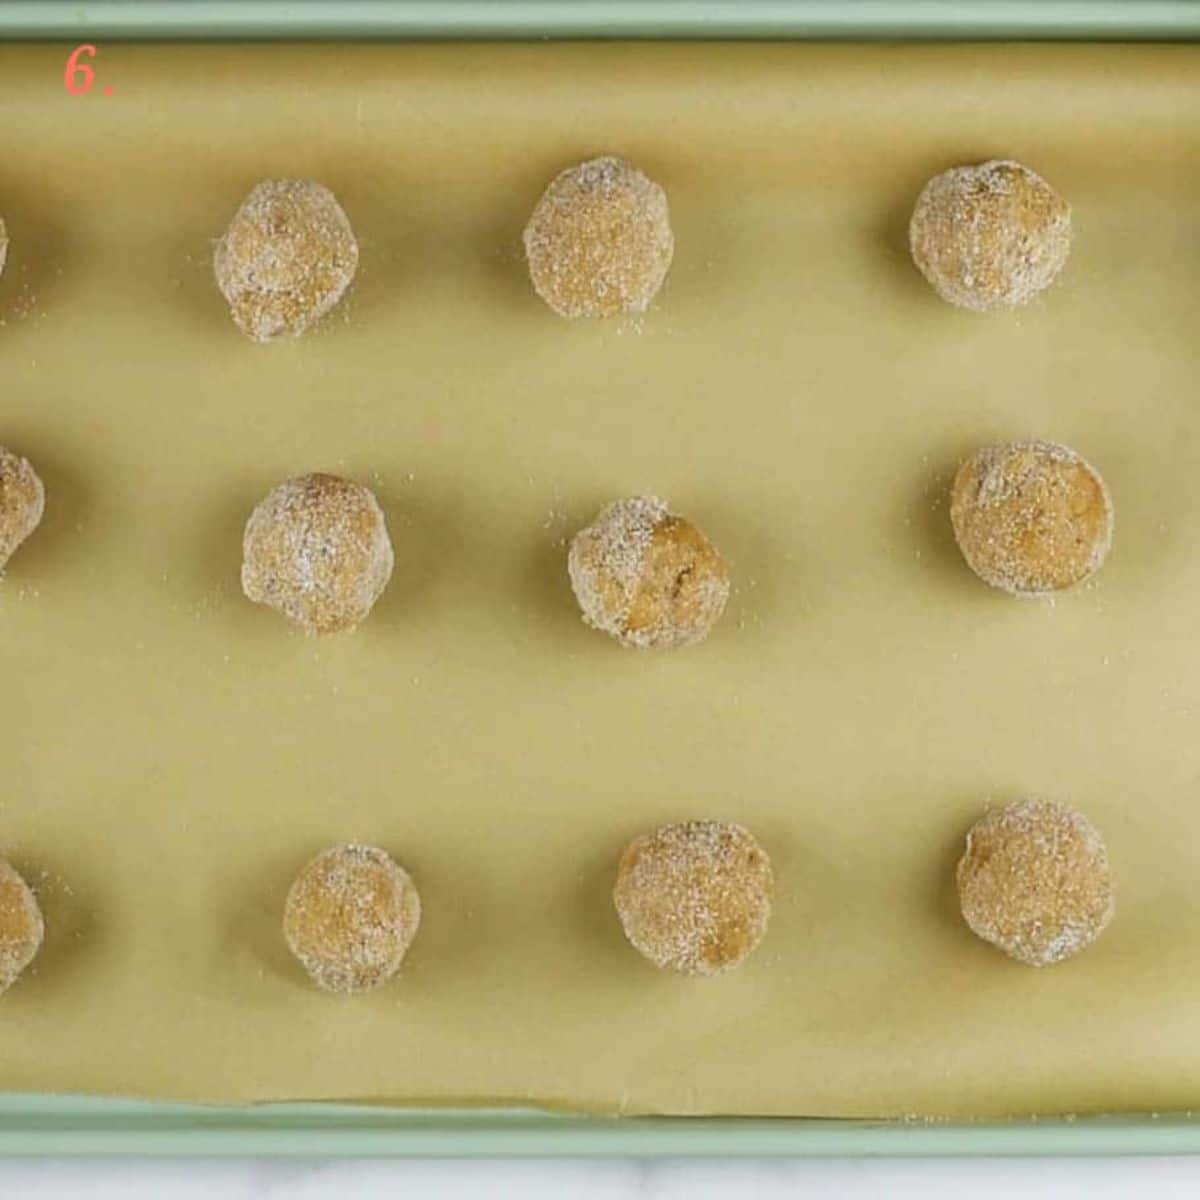 Twelve cookie balls on a parchment-paper lined baking sheet.